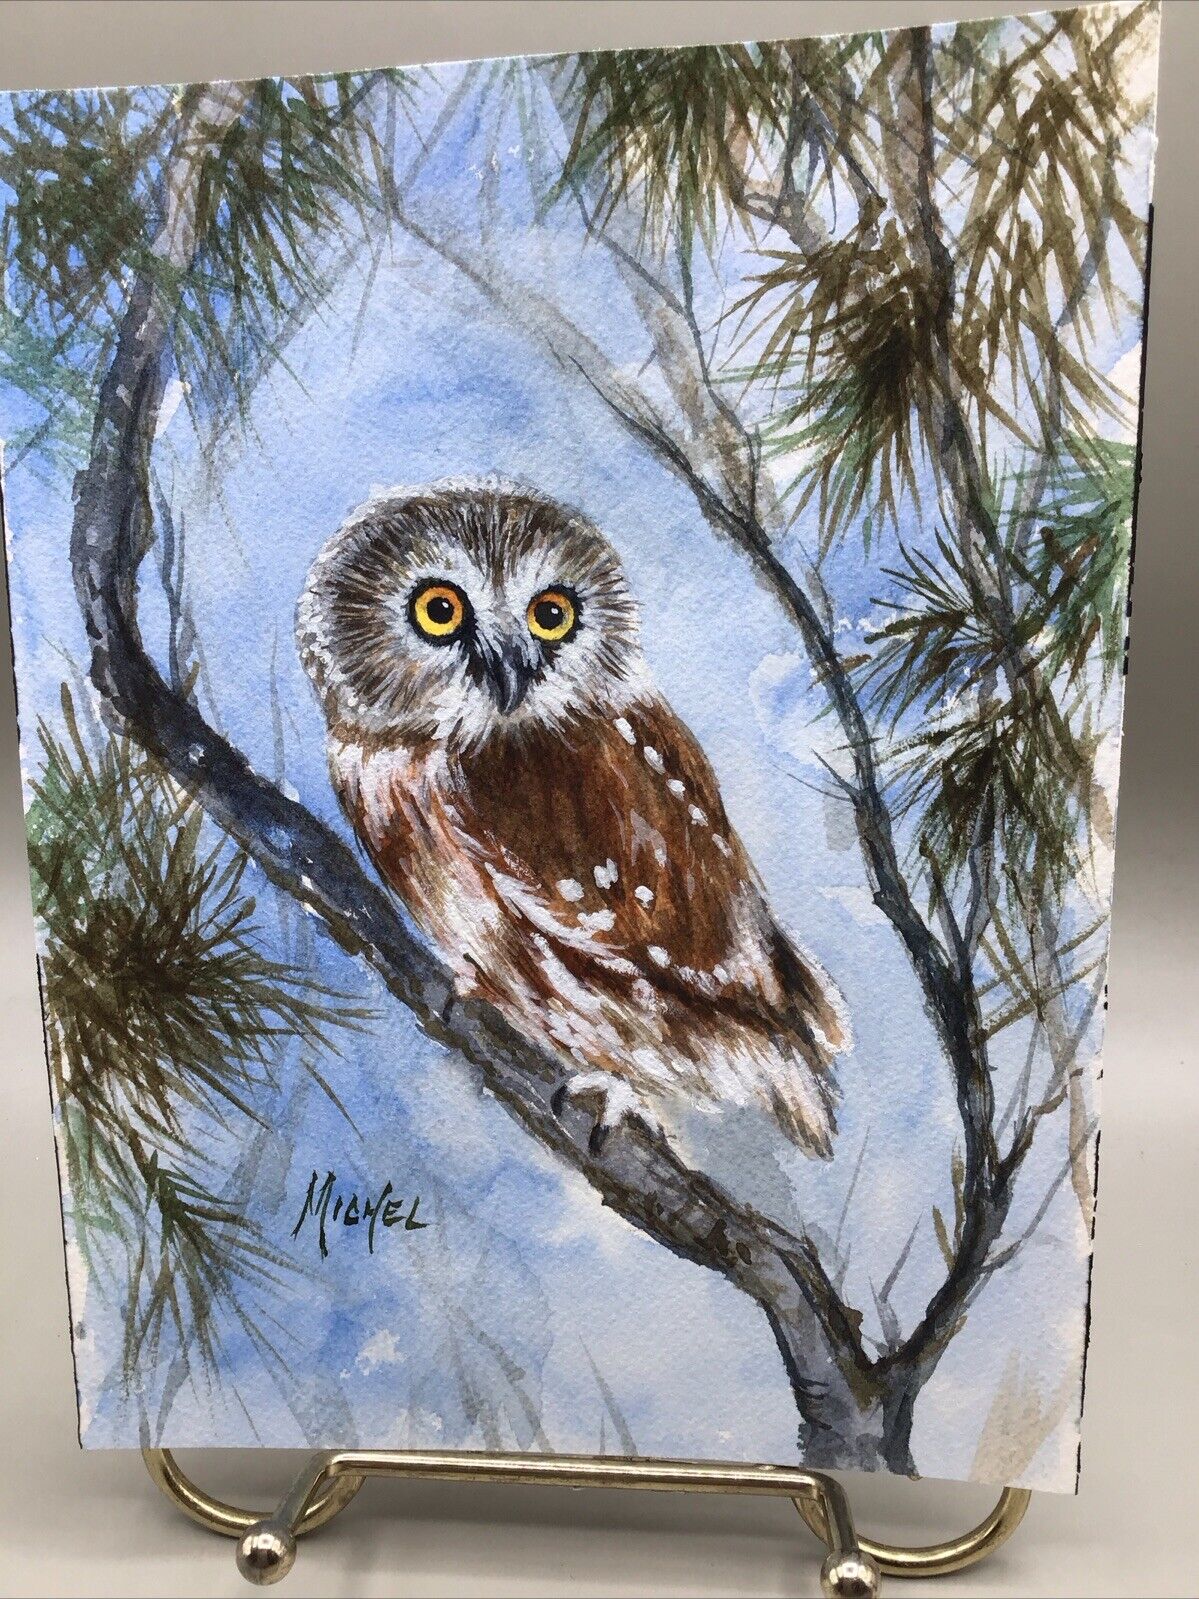 Original Hand Painted Northern Saw-Whet Owl Oil Painting Signed Michel.